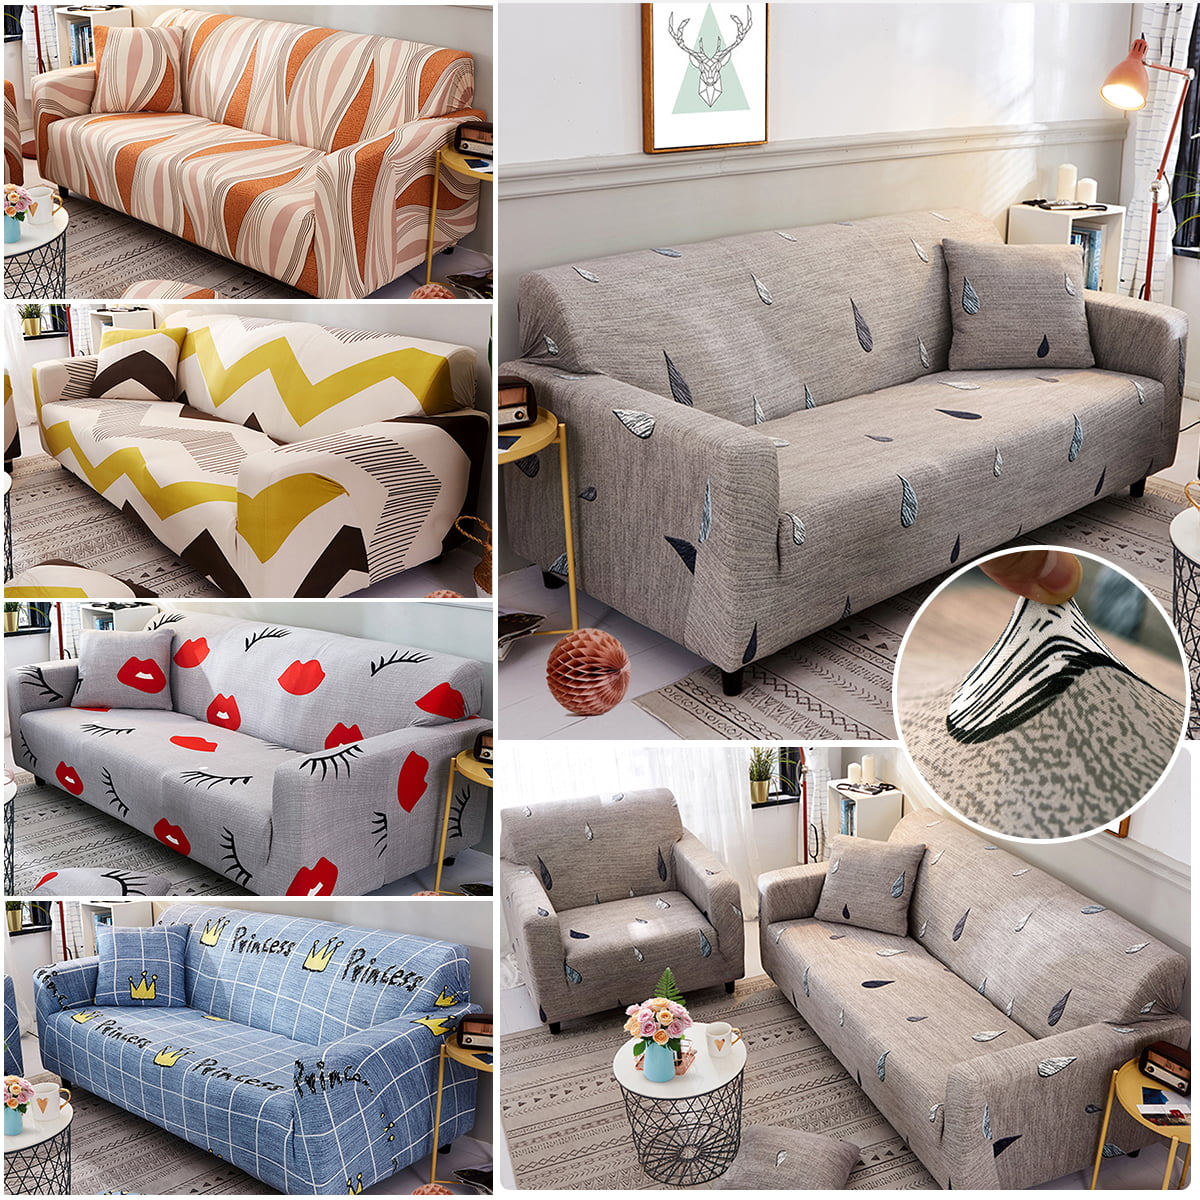 Details about   Protector Sofa cover Elastic Full Slipcovers Armchair Sofa SlipcoversCouch cover 